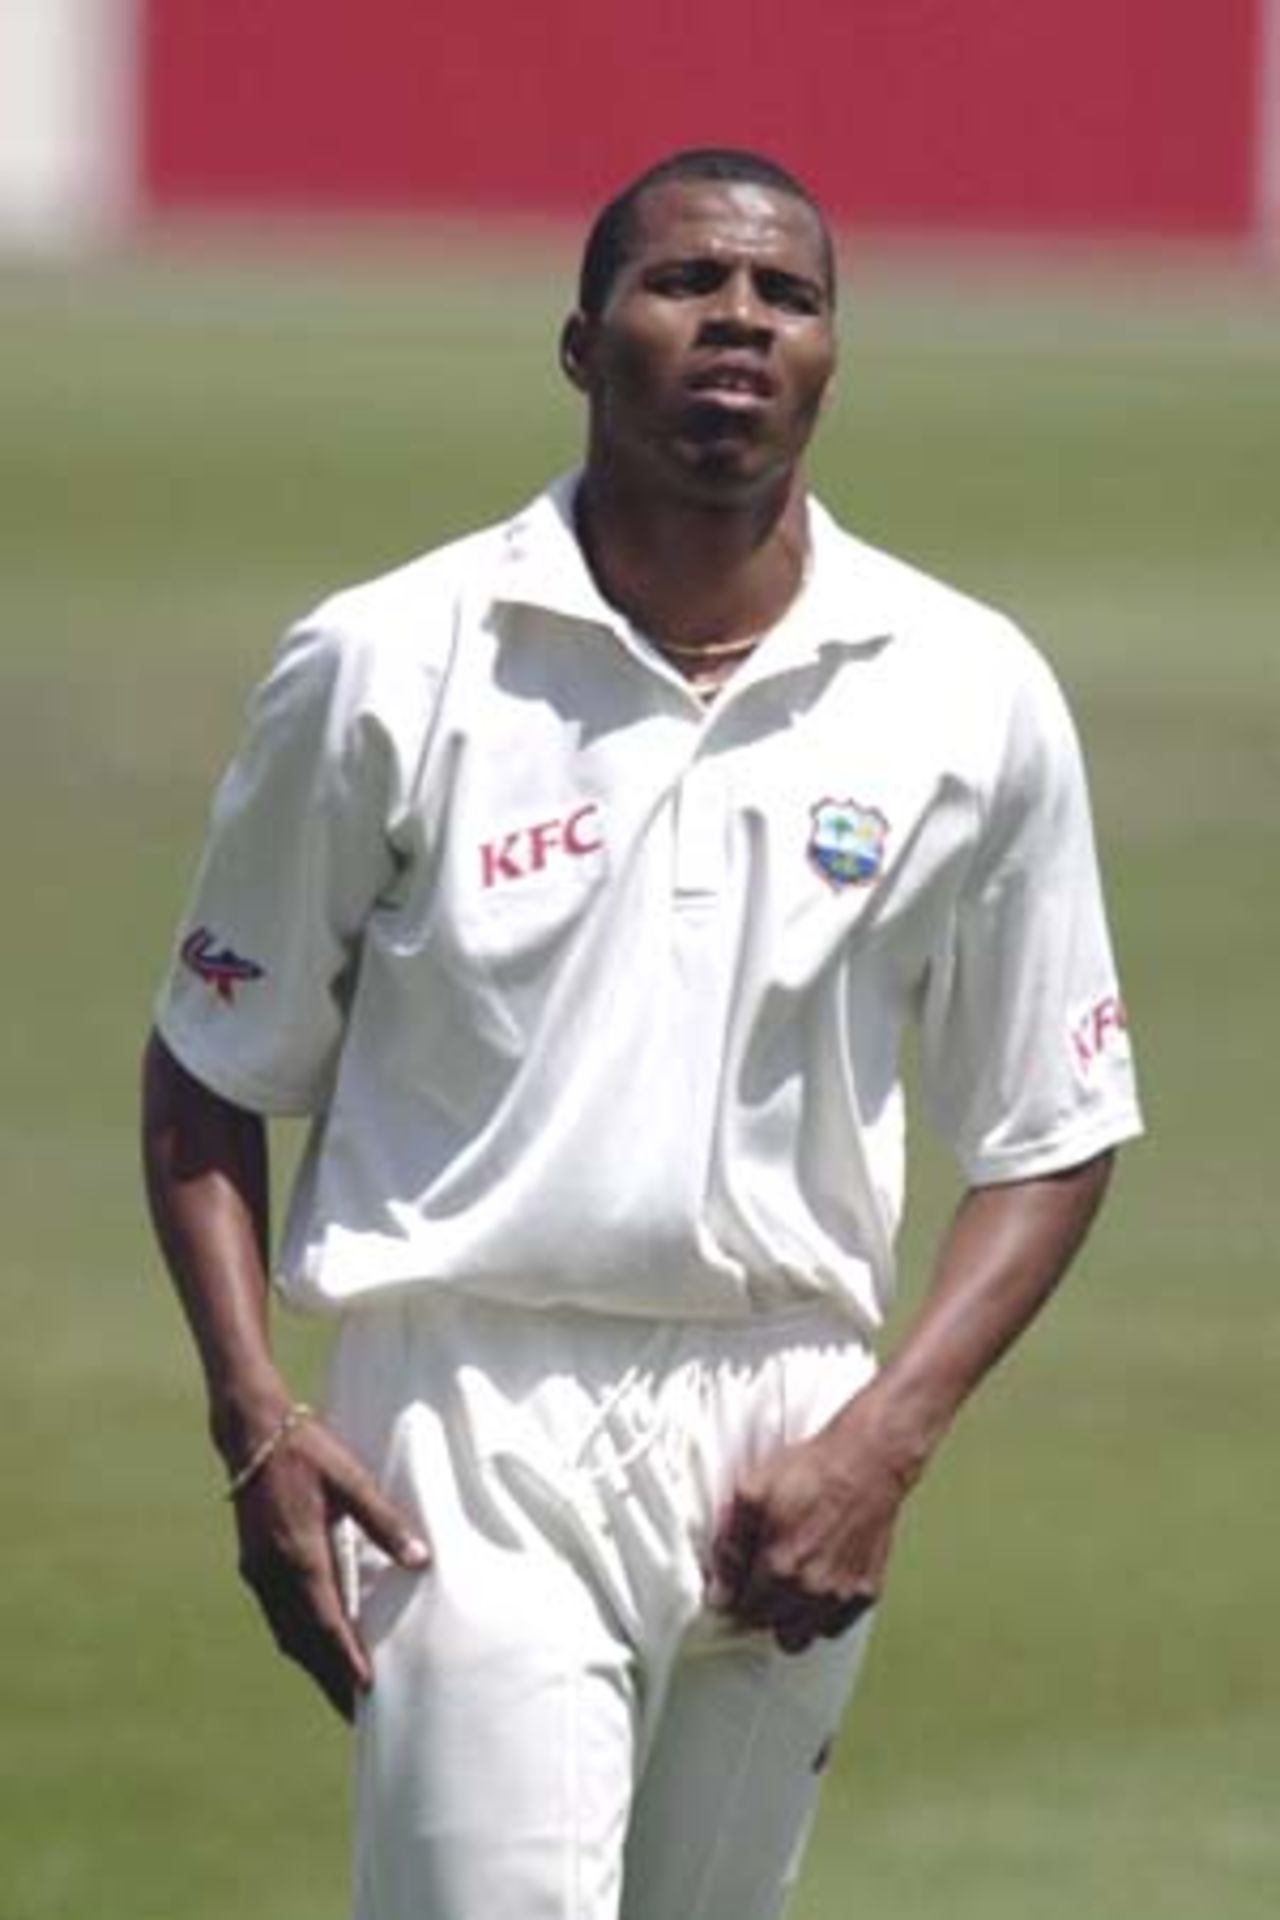 12 Nov 2000: Mervyn Dillon of the West Indies in the match between the Western Warriors and the West Indies at the WACA ground in Perth, Australia.